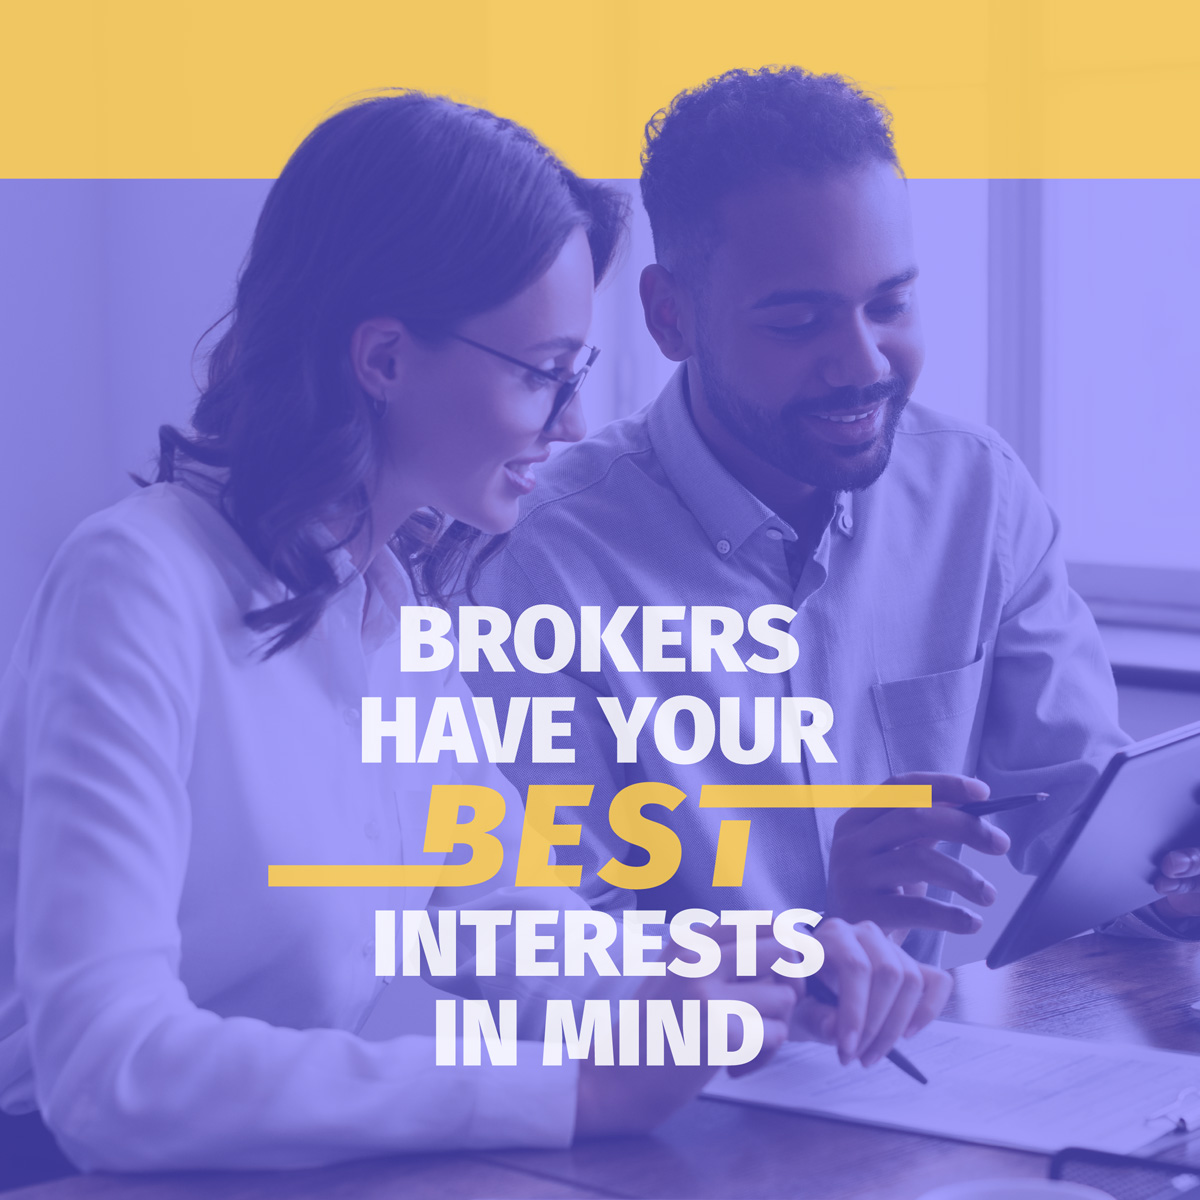 From providing above-and-beyond service to helping you find the right lender, independent mortgage brokers are serious about doing what benefits you — instead of their own bottom line. Call me today to see how I'm prepared to help you.